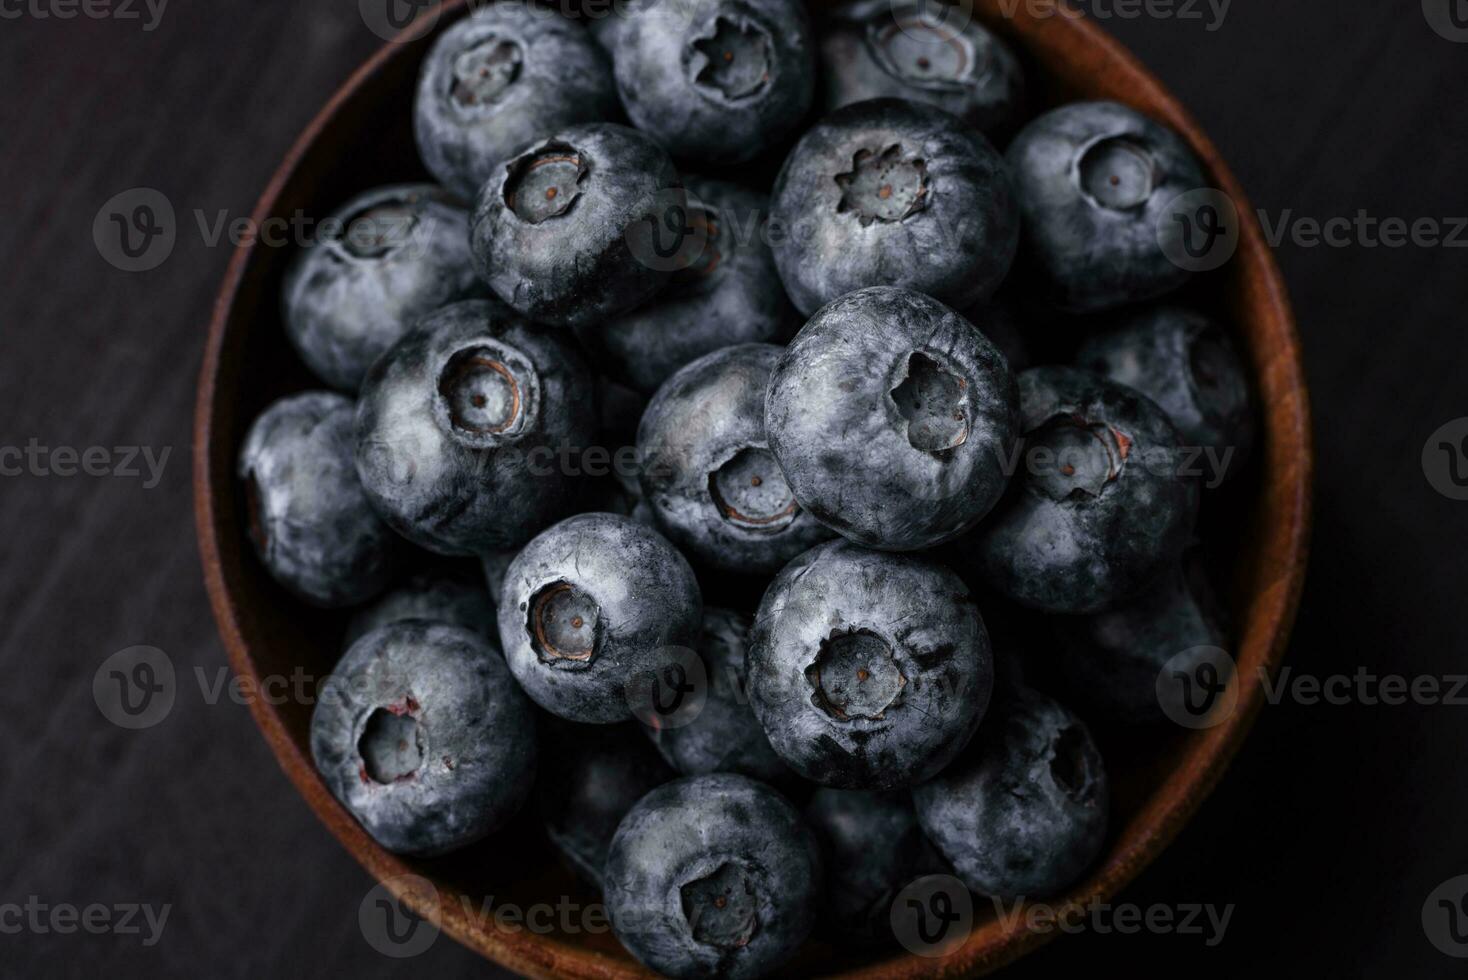 Delicious fresh sweet blueberries in a ceramic bowl. Vegan food photo